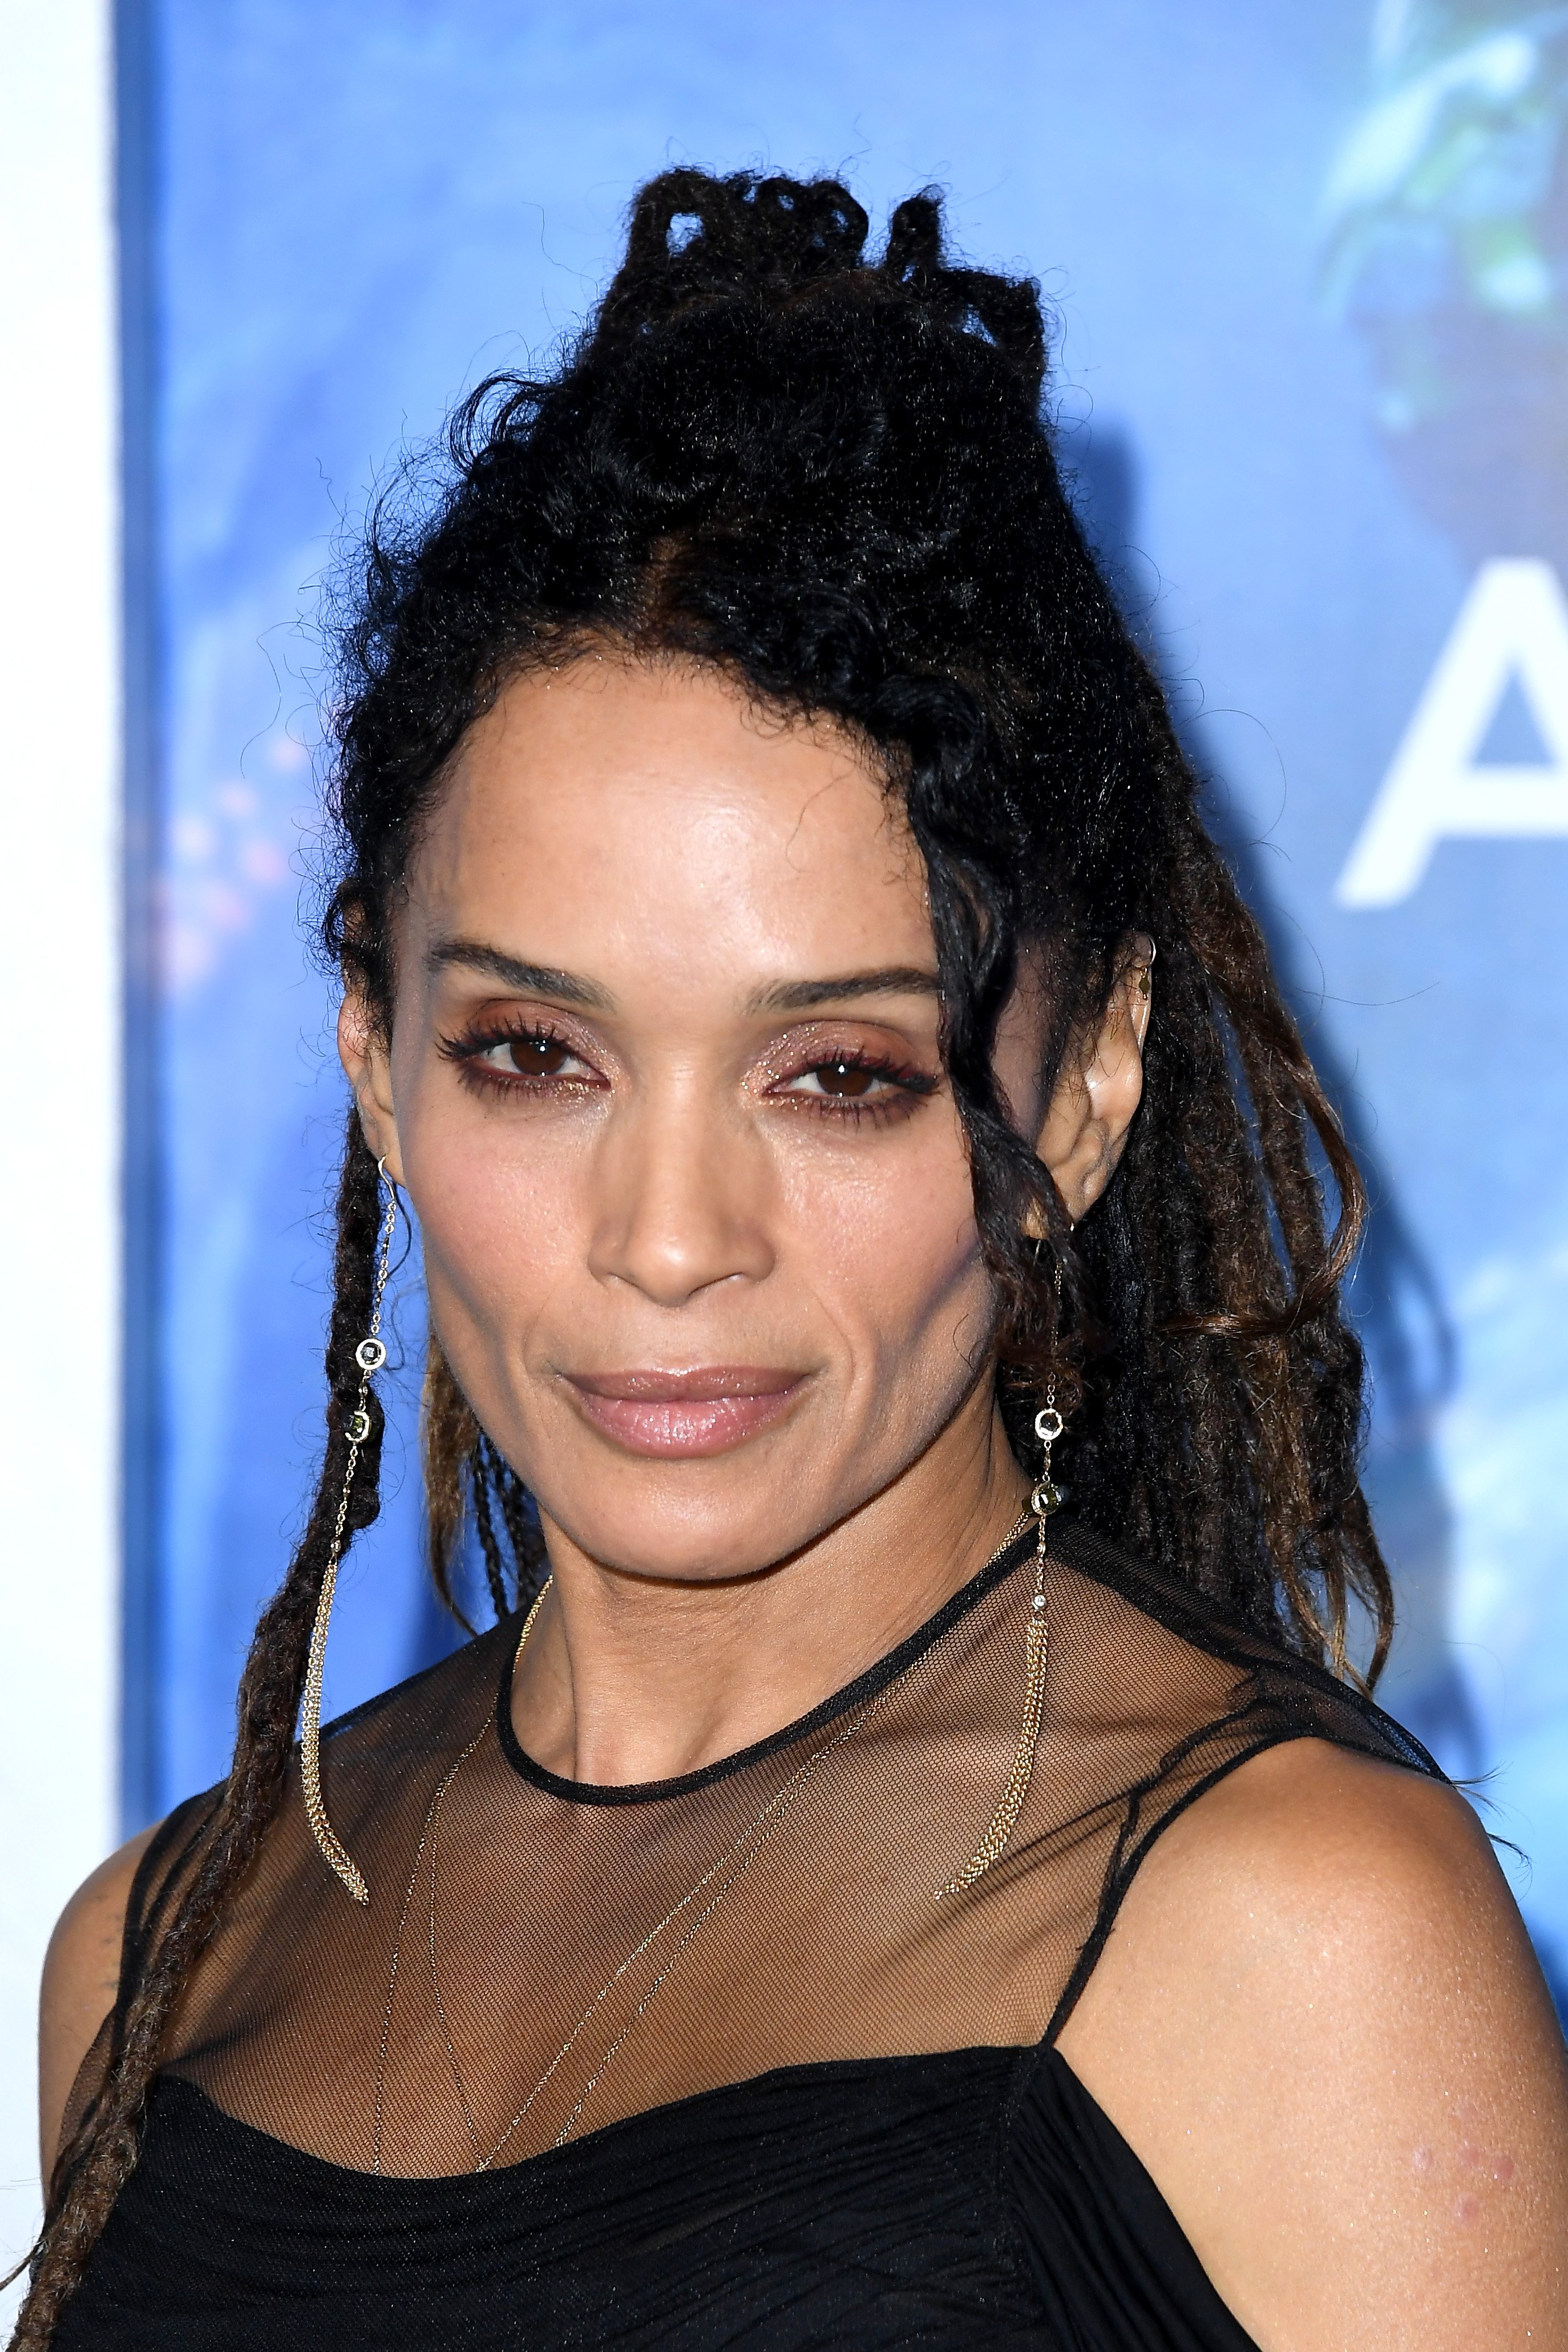 Actress Lisa Bonet attends the premiere of "Aquaman" at TCL Chinese Theatre on December 12, 2018 in Hollywood, California ┃Source: Getty Images